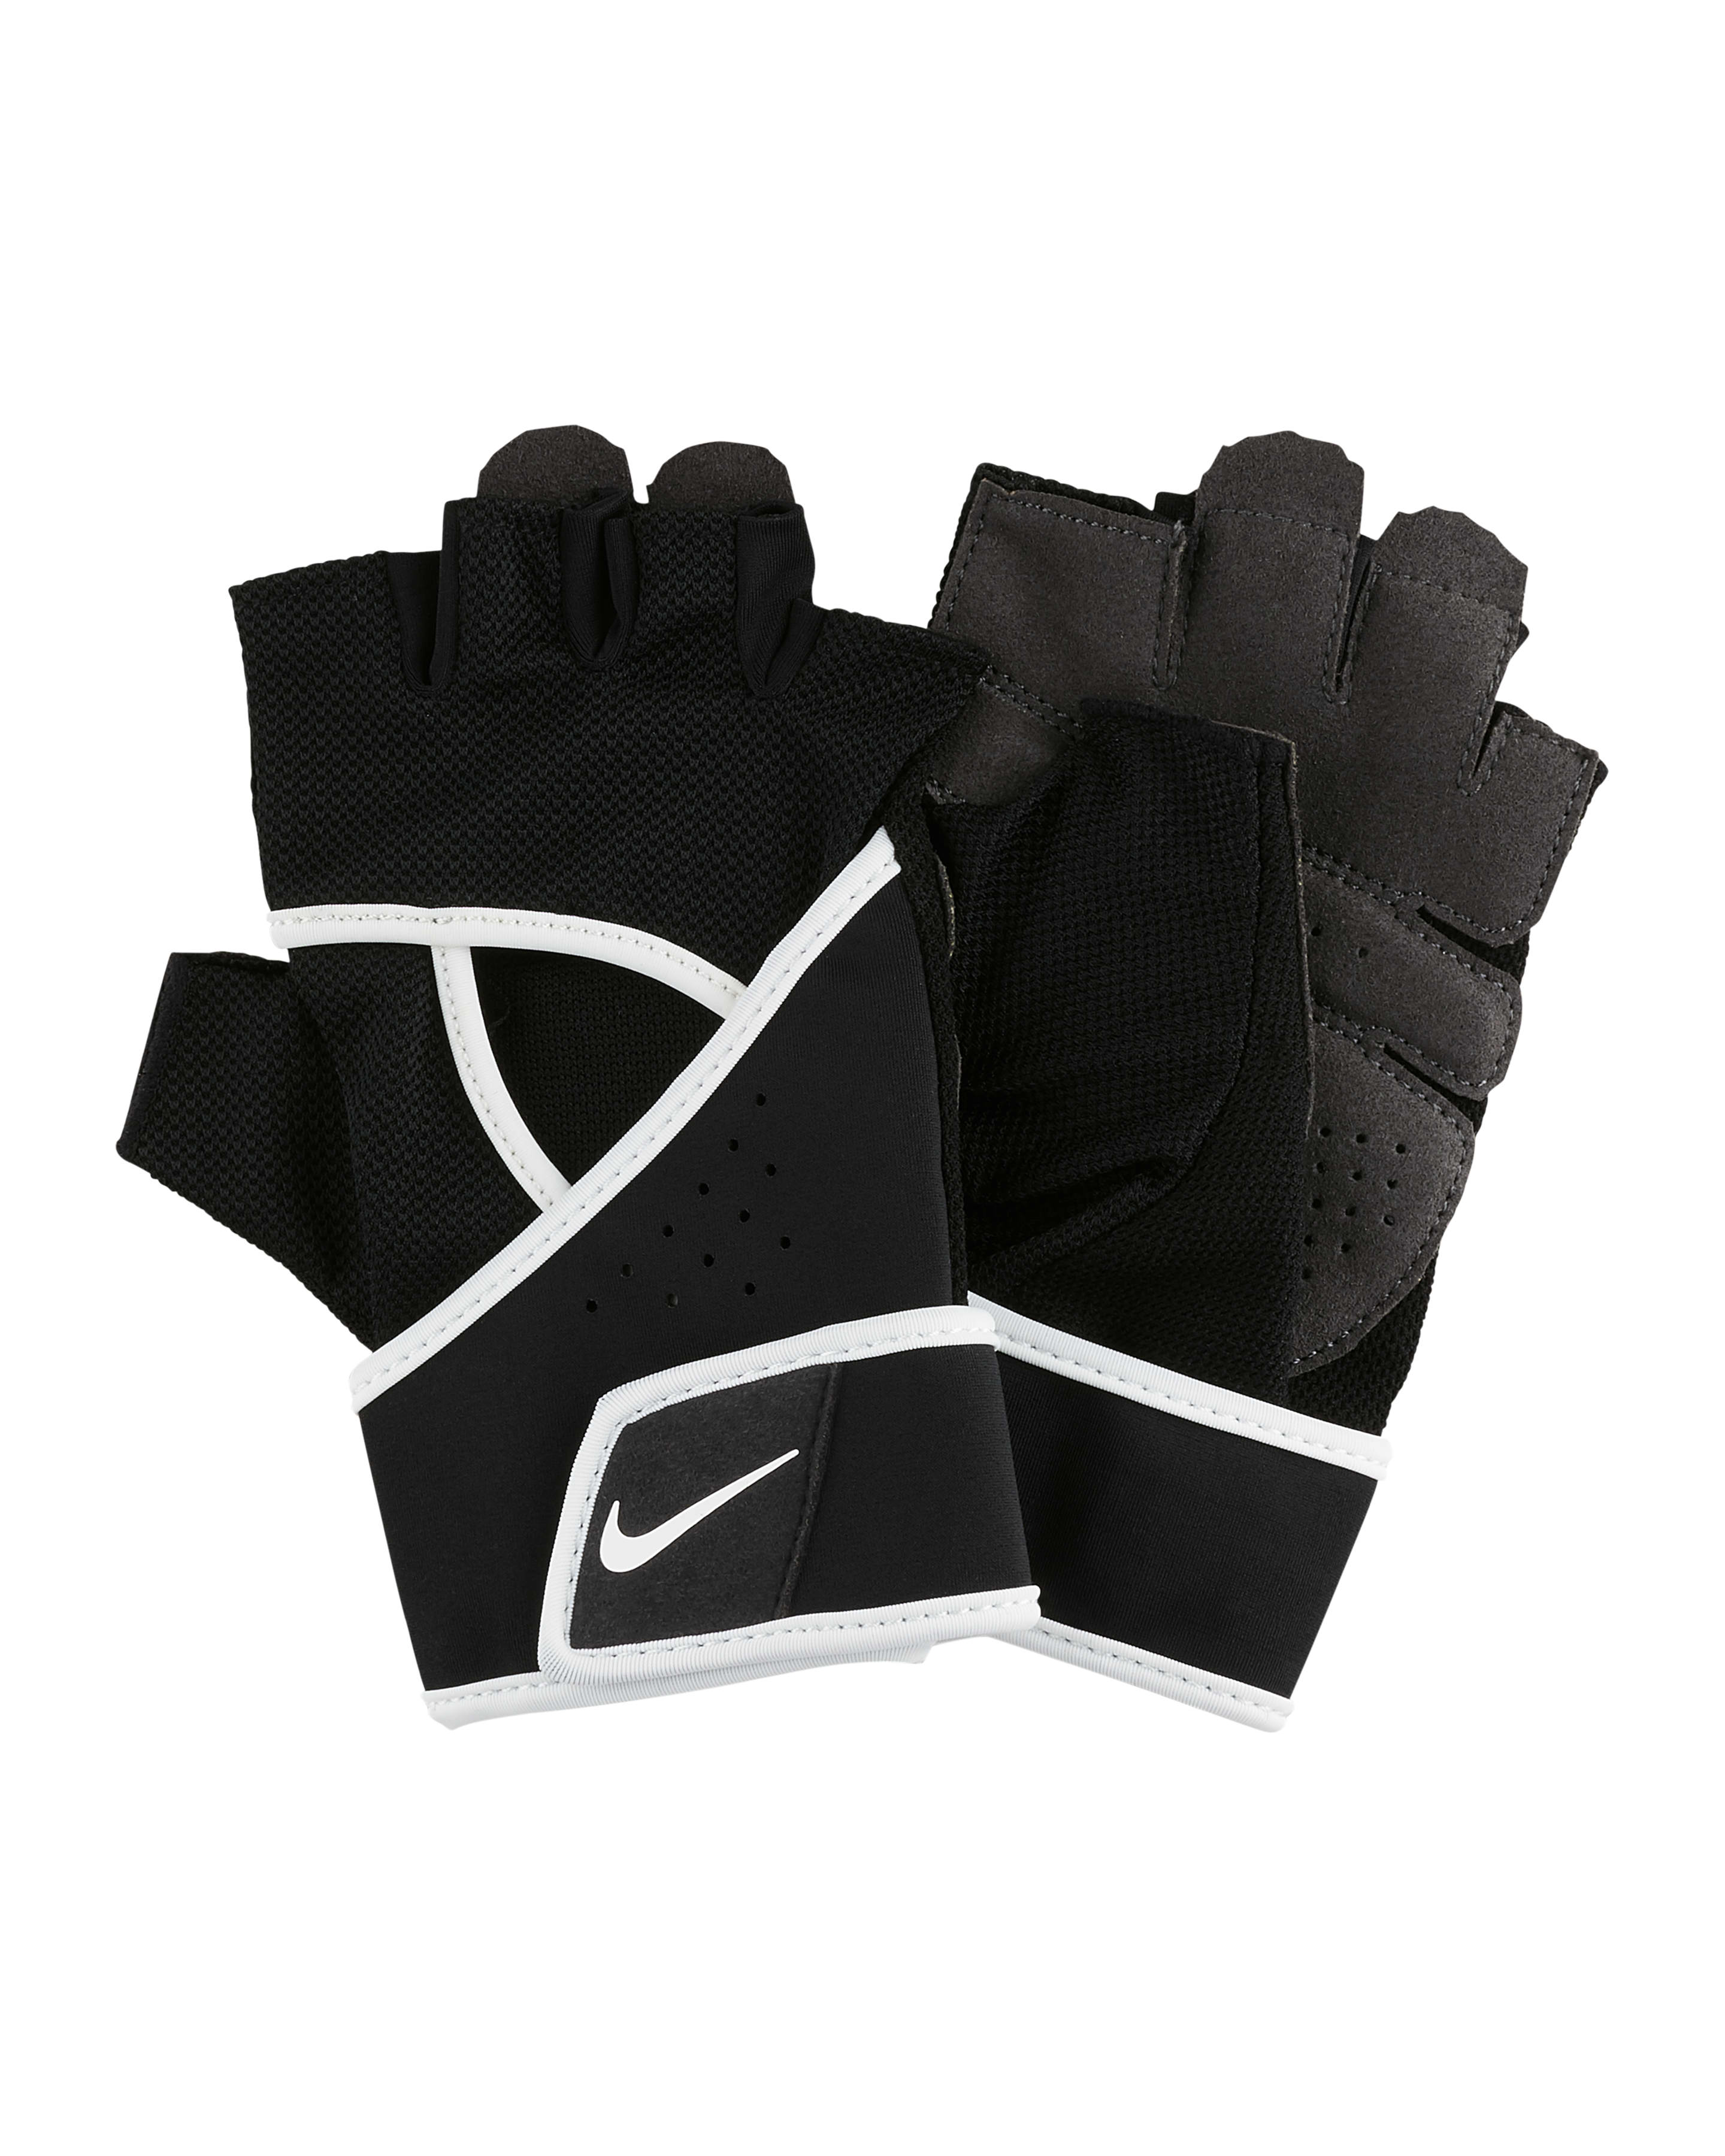 Best Workout Gloves 2023: Top Gym Gloves for Weights, Cross Training